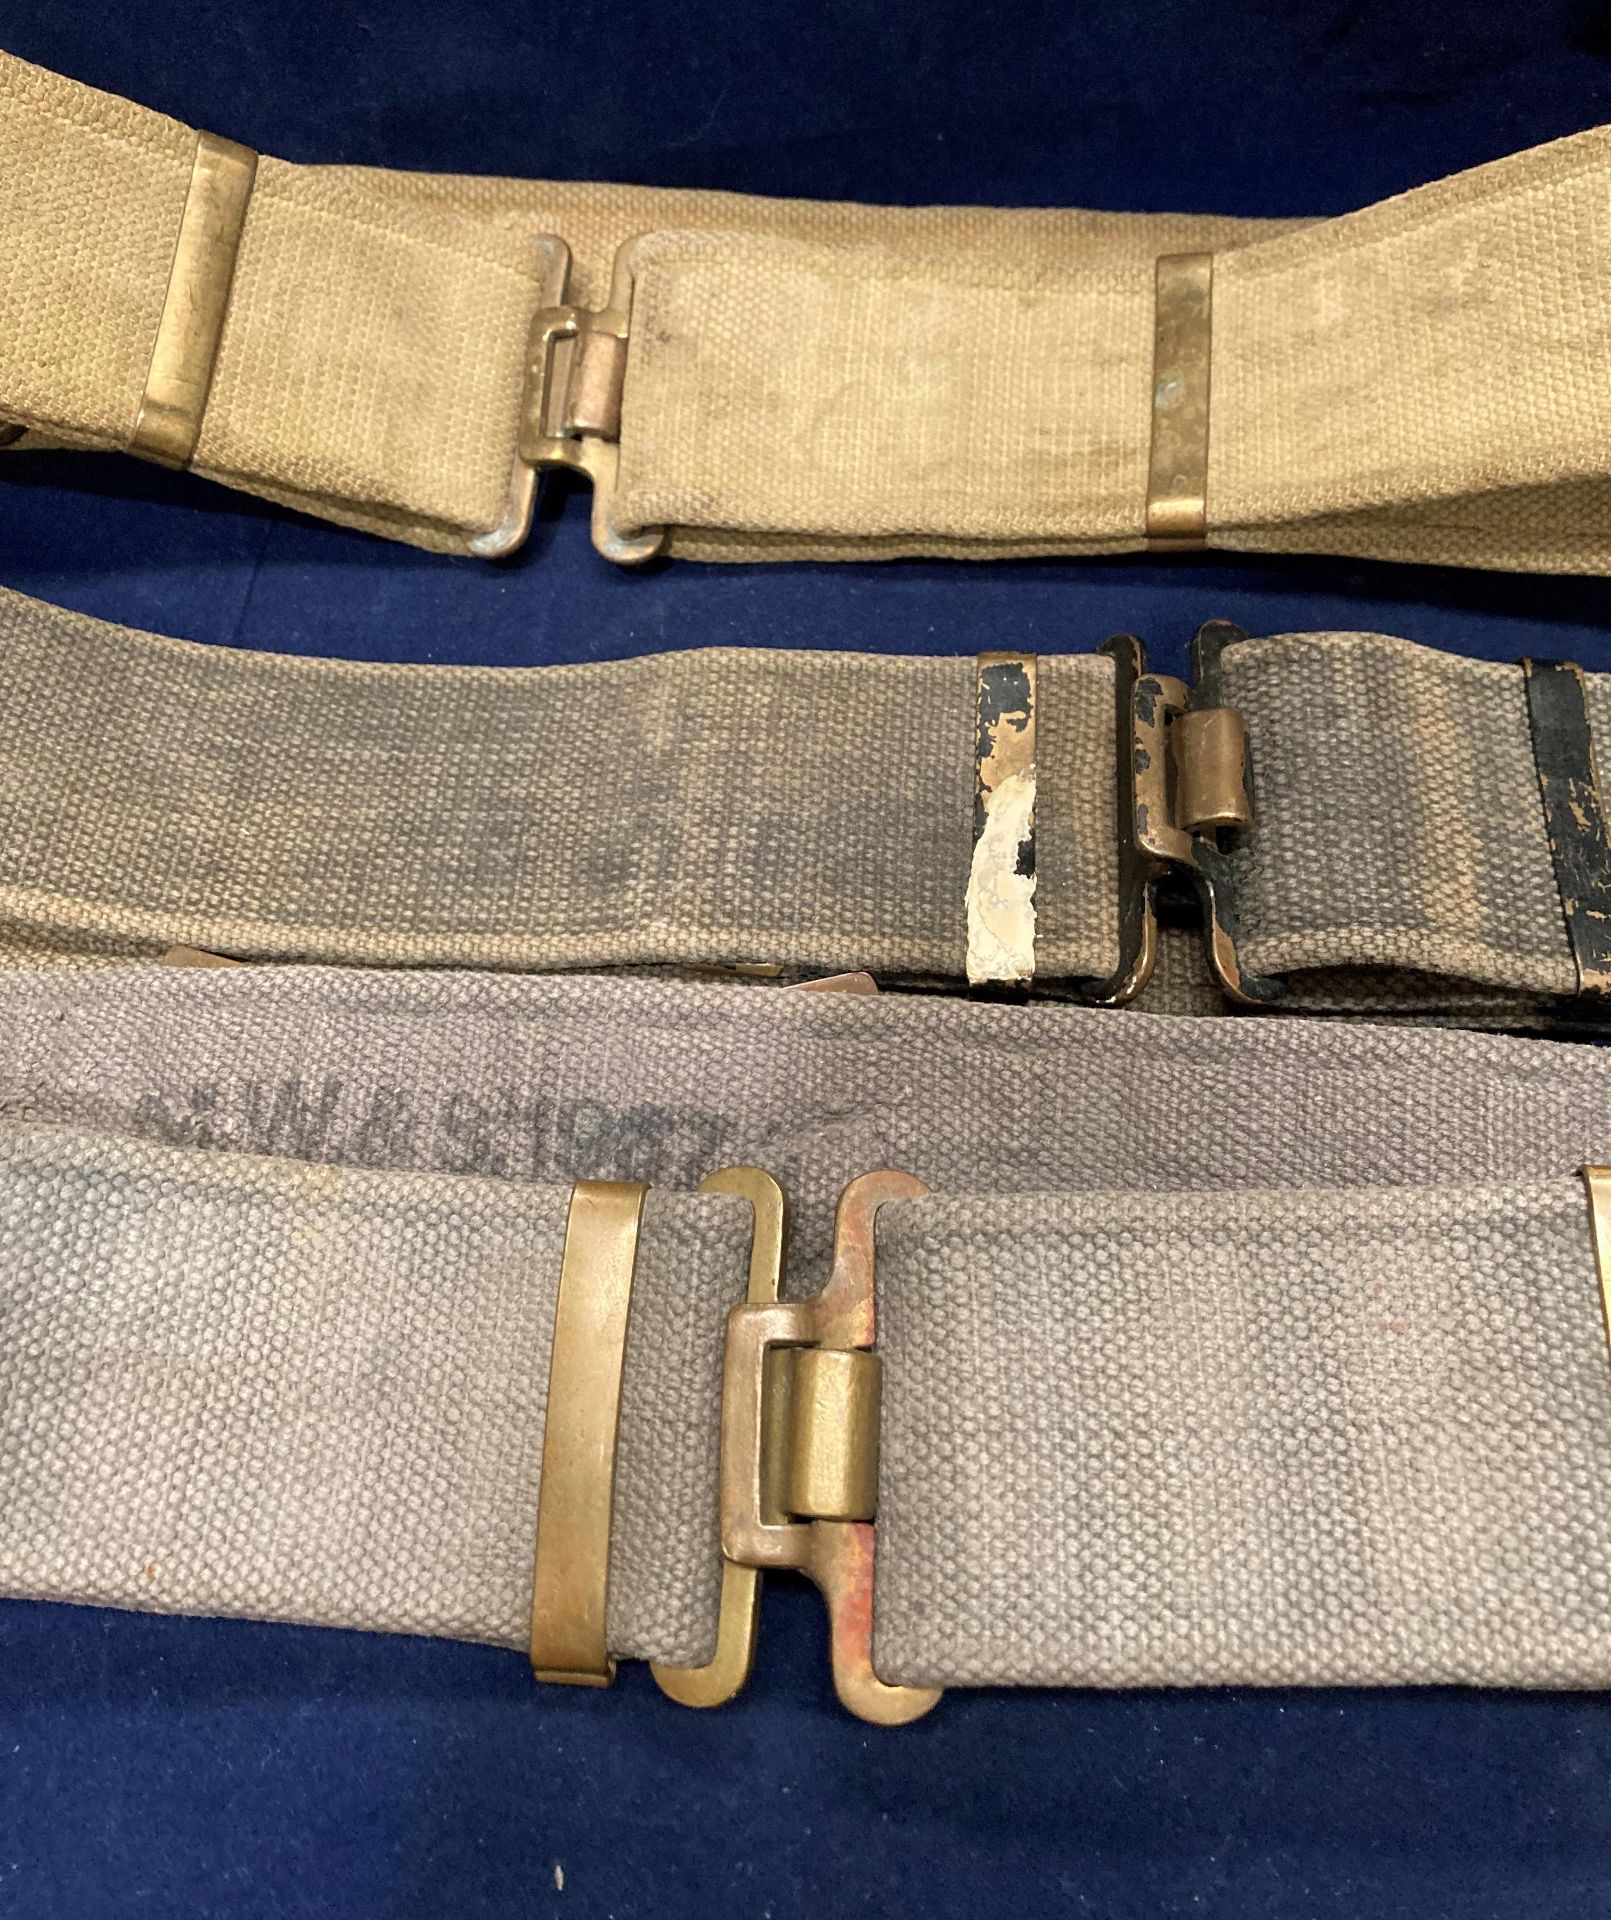 Two World War II British Army 37 pattern belts (one khaki and one grey) and a belt/utility strap - Image 2 of 3